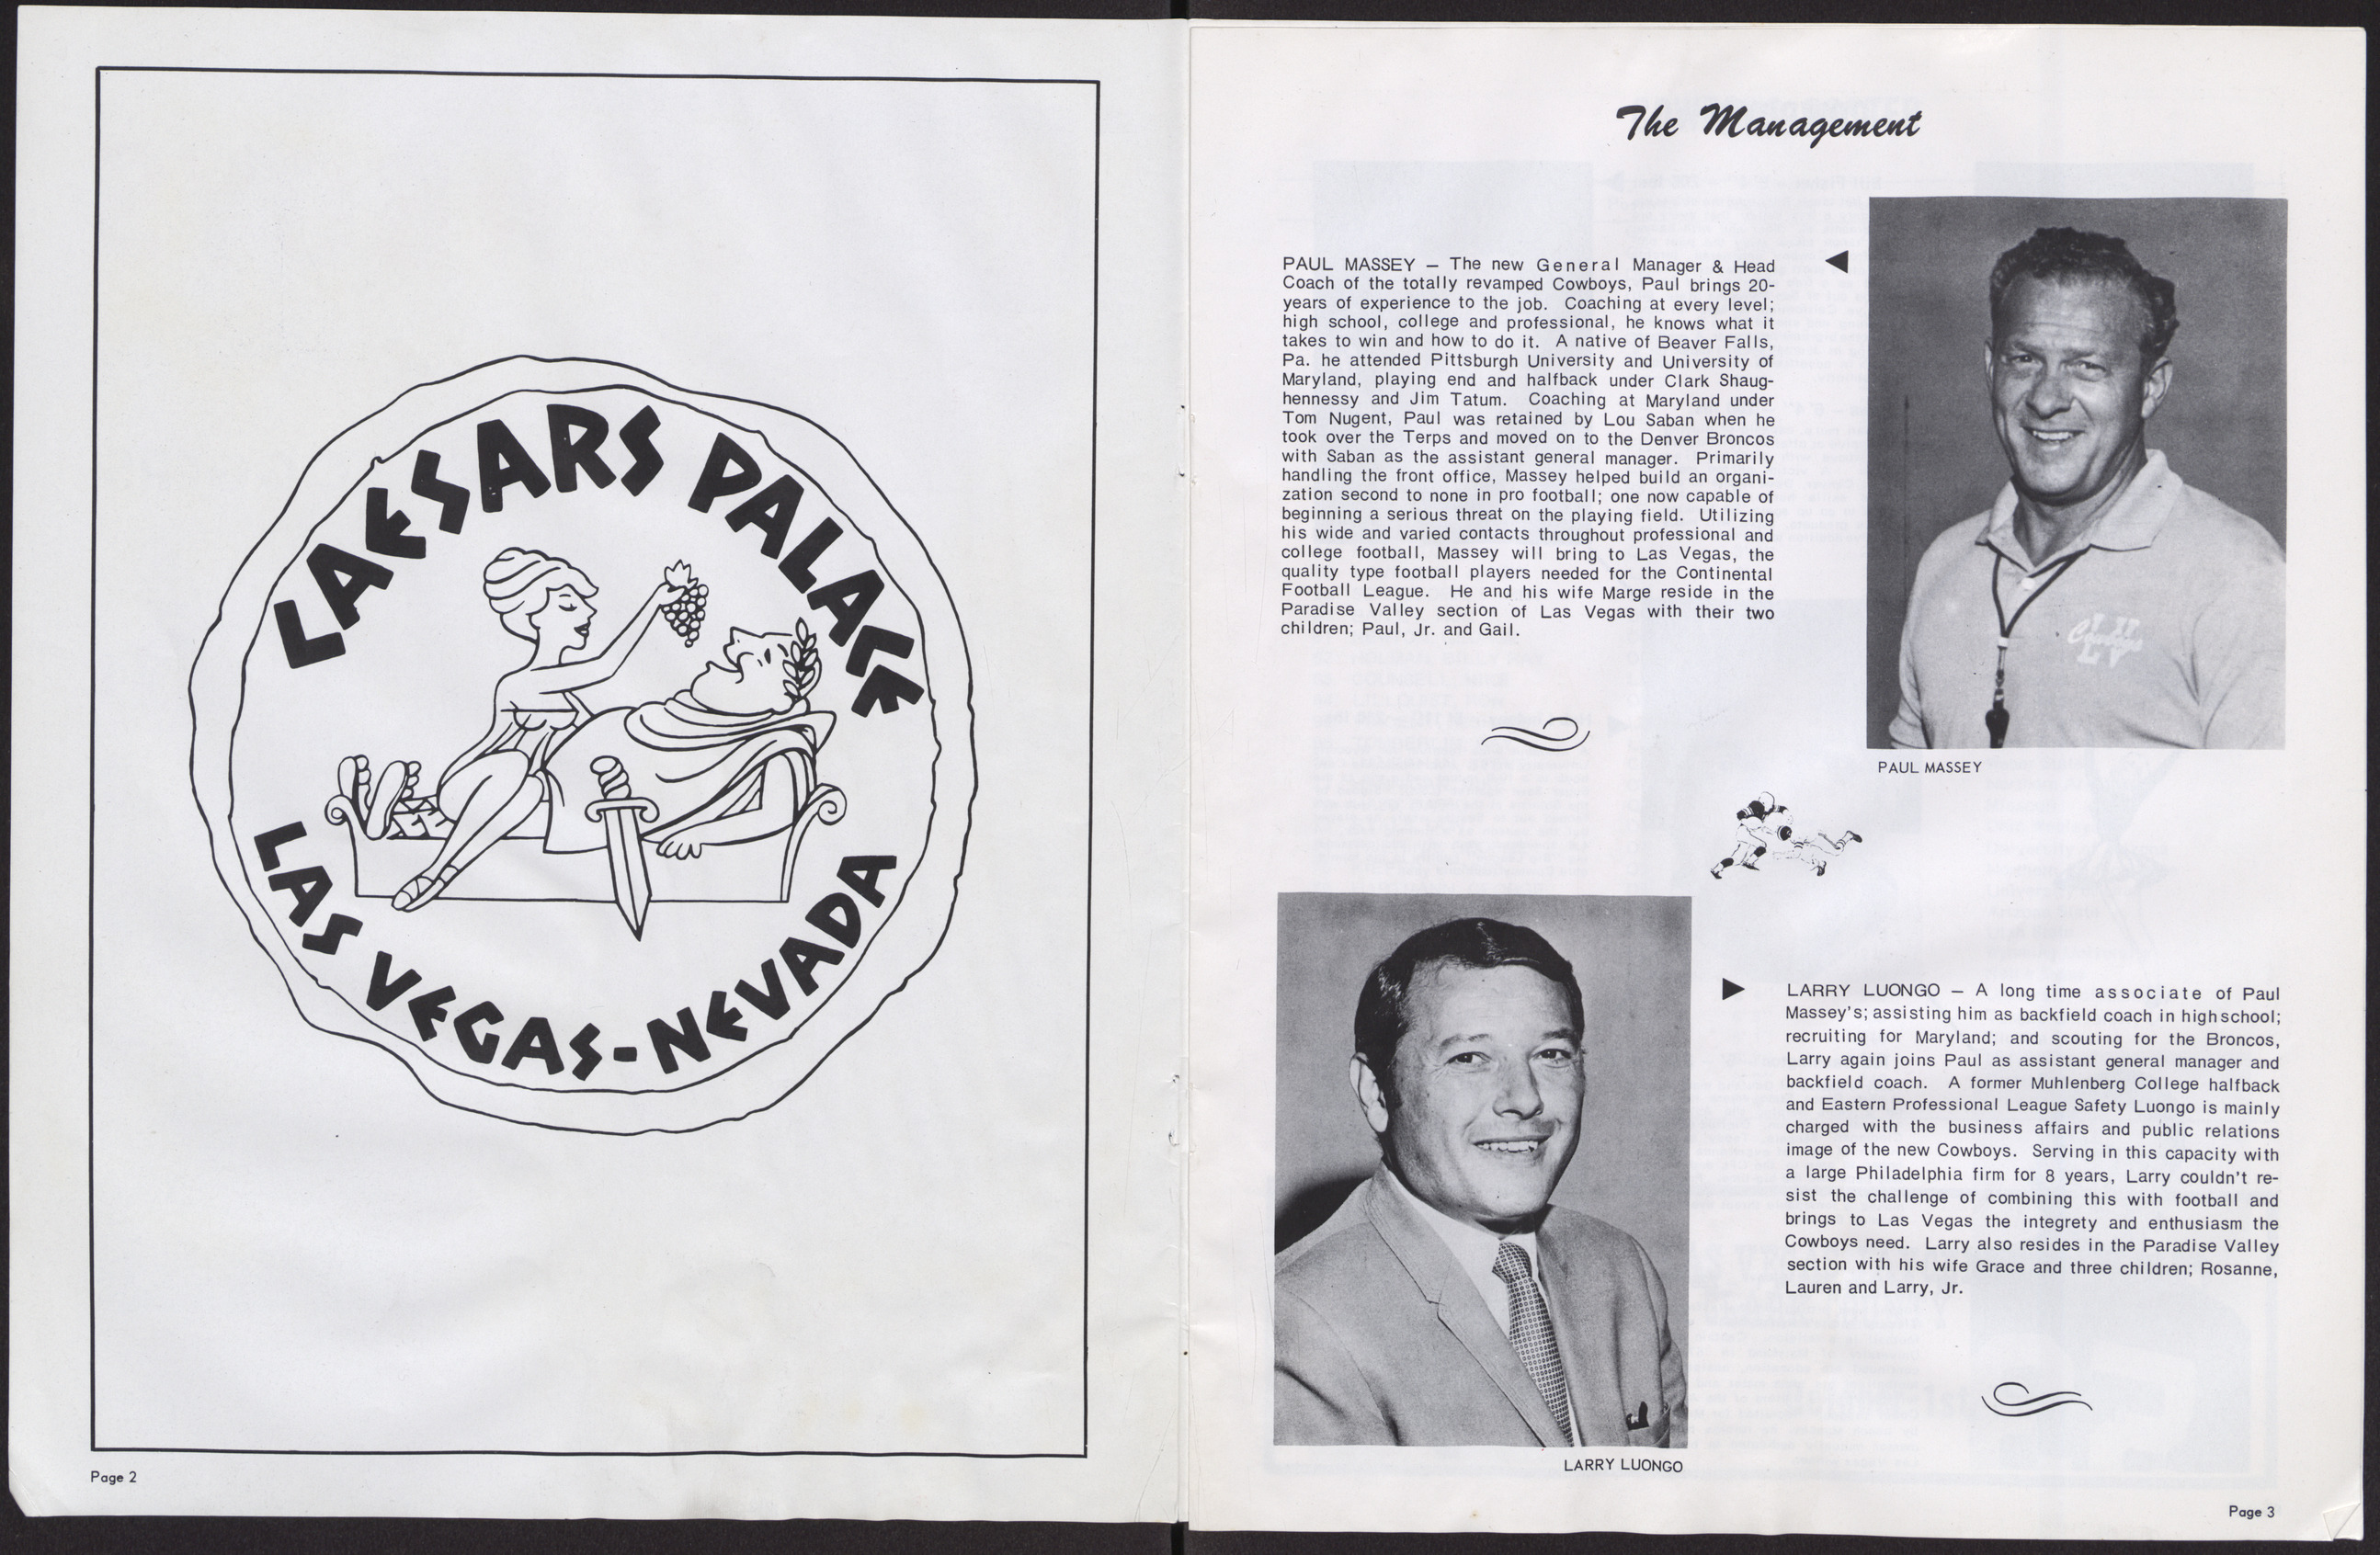 Official Program for the Las Vegas Cowboys vs. Portland Loggers football game, August 9, 1969, page 2-3